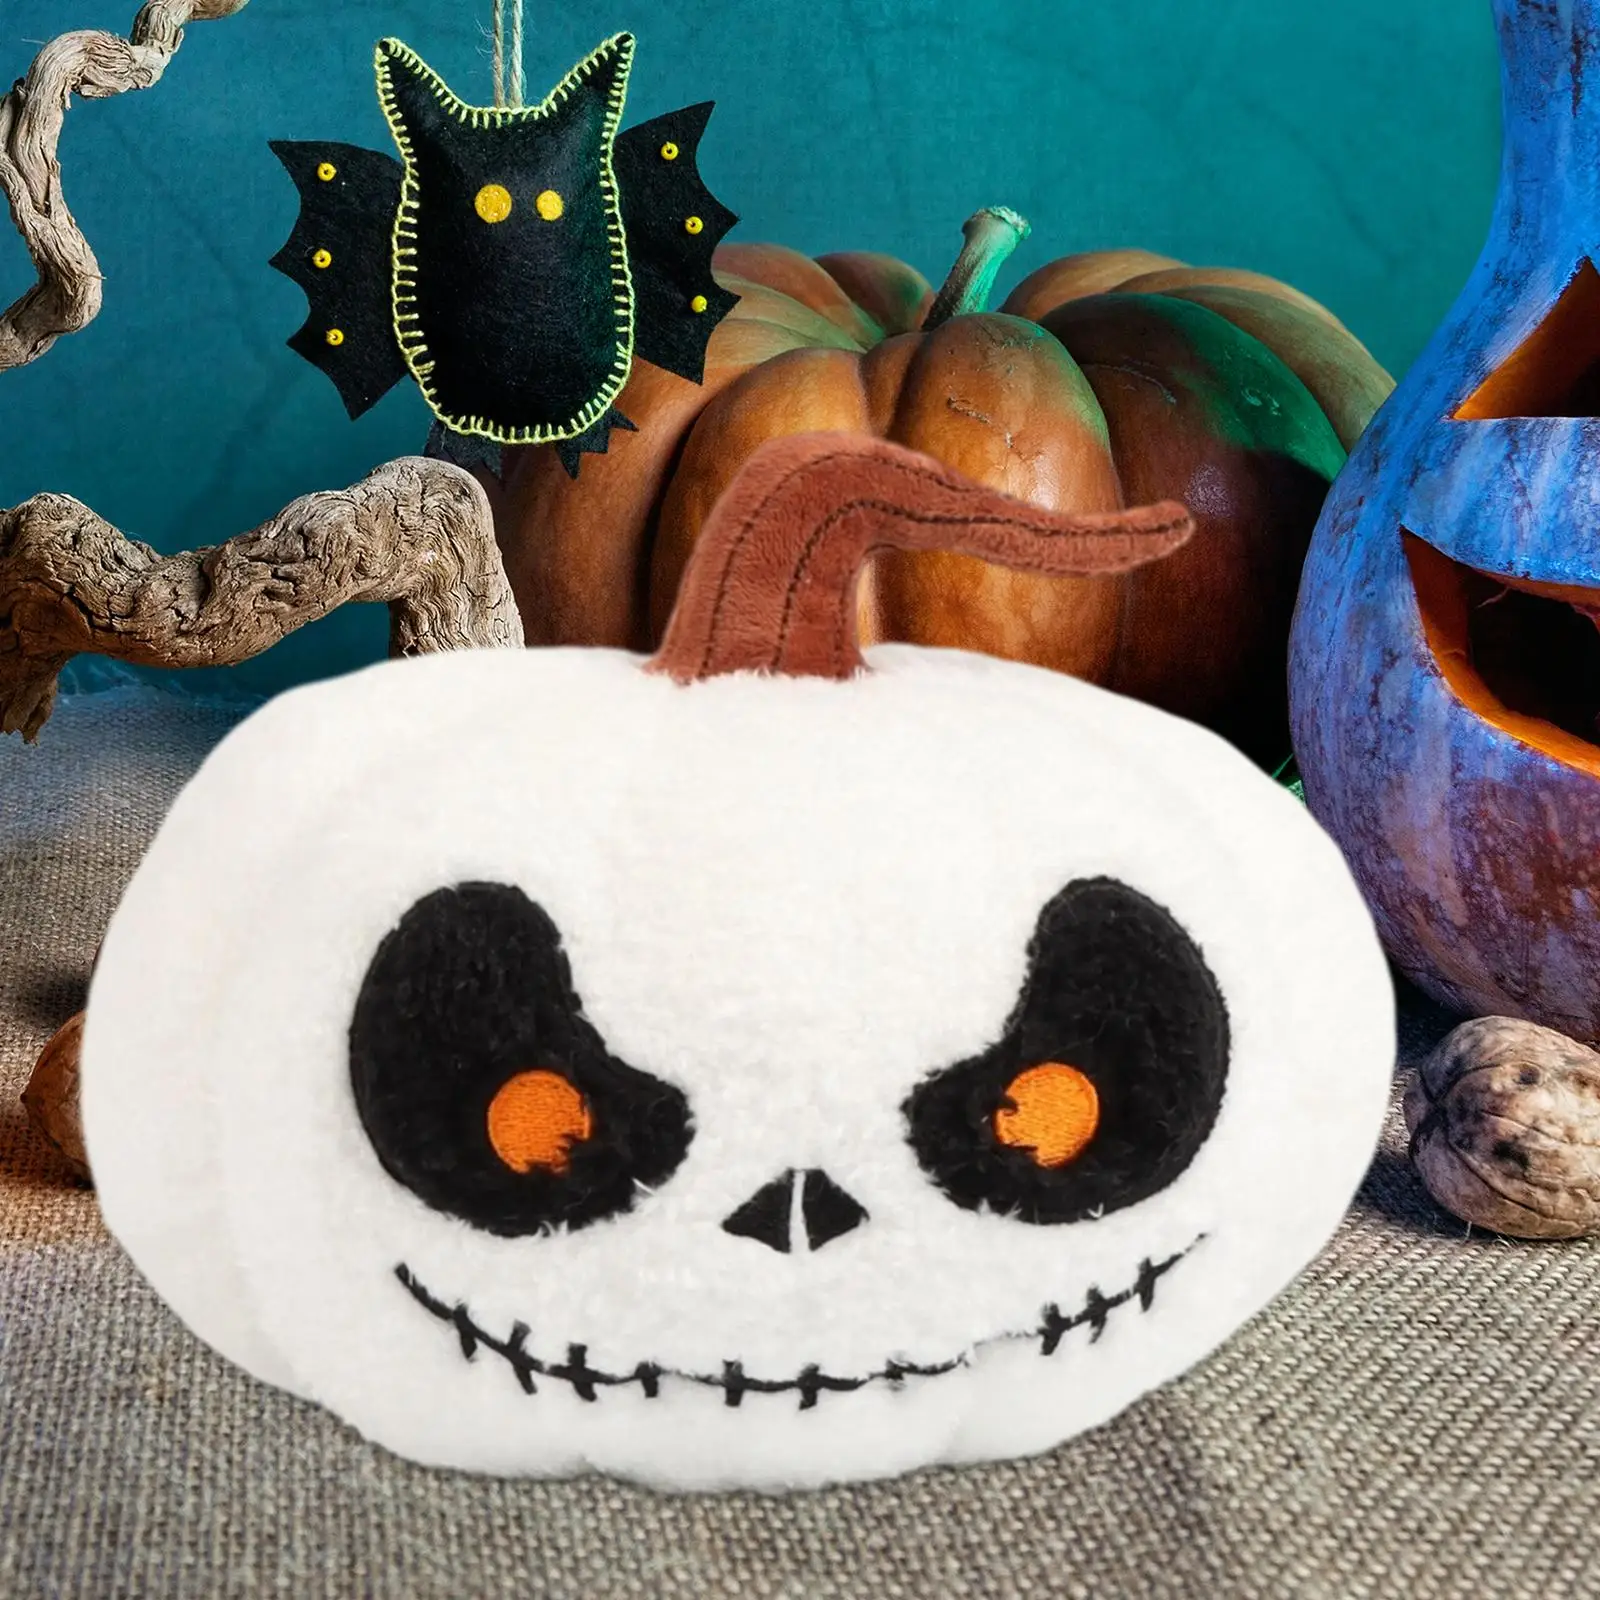 

20cm Halloween Pumpkin Pillow Cushion 3D Cute Plush Toy Halloween Party Holidays Props Decorative for Kids Gift